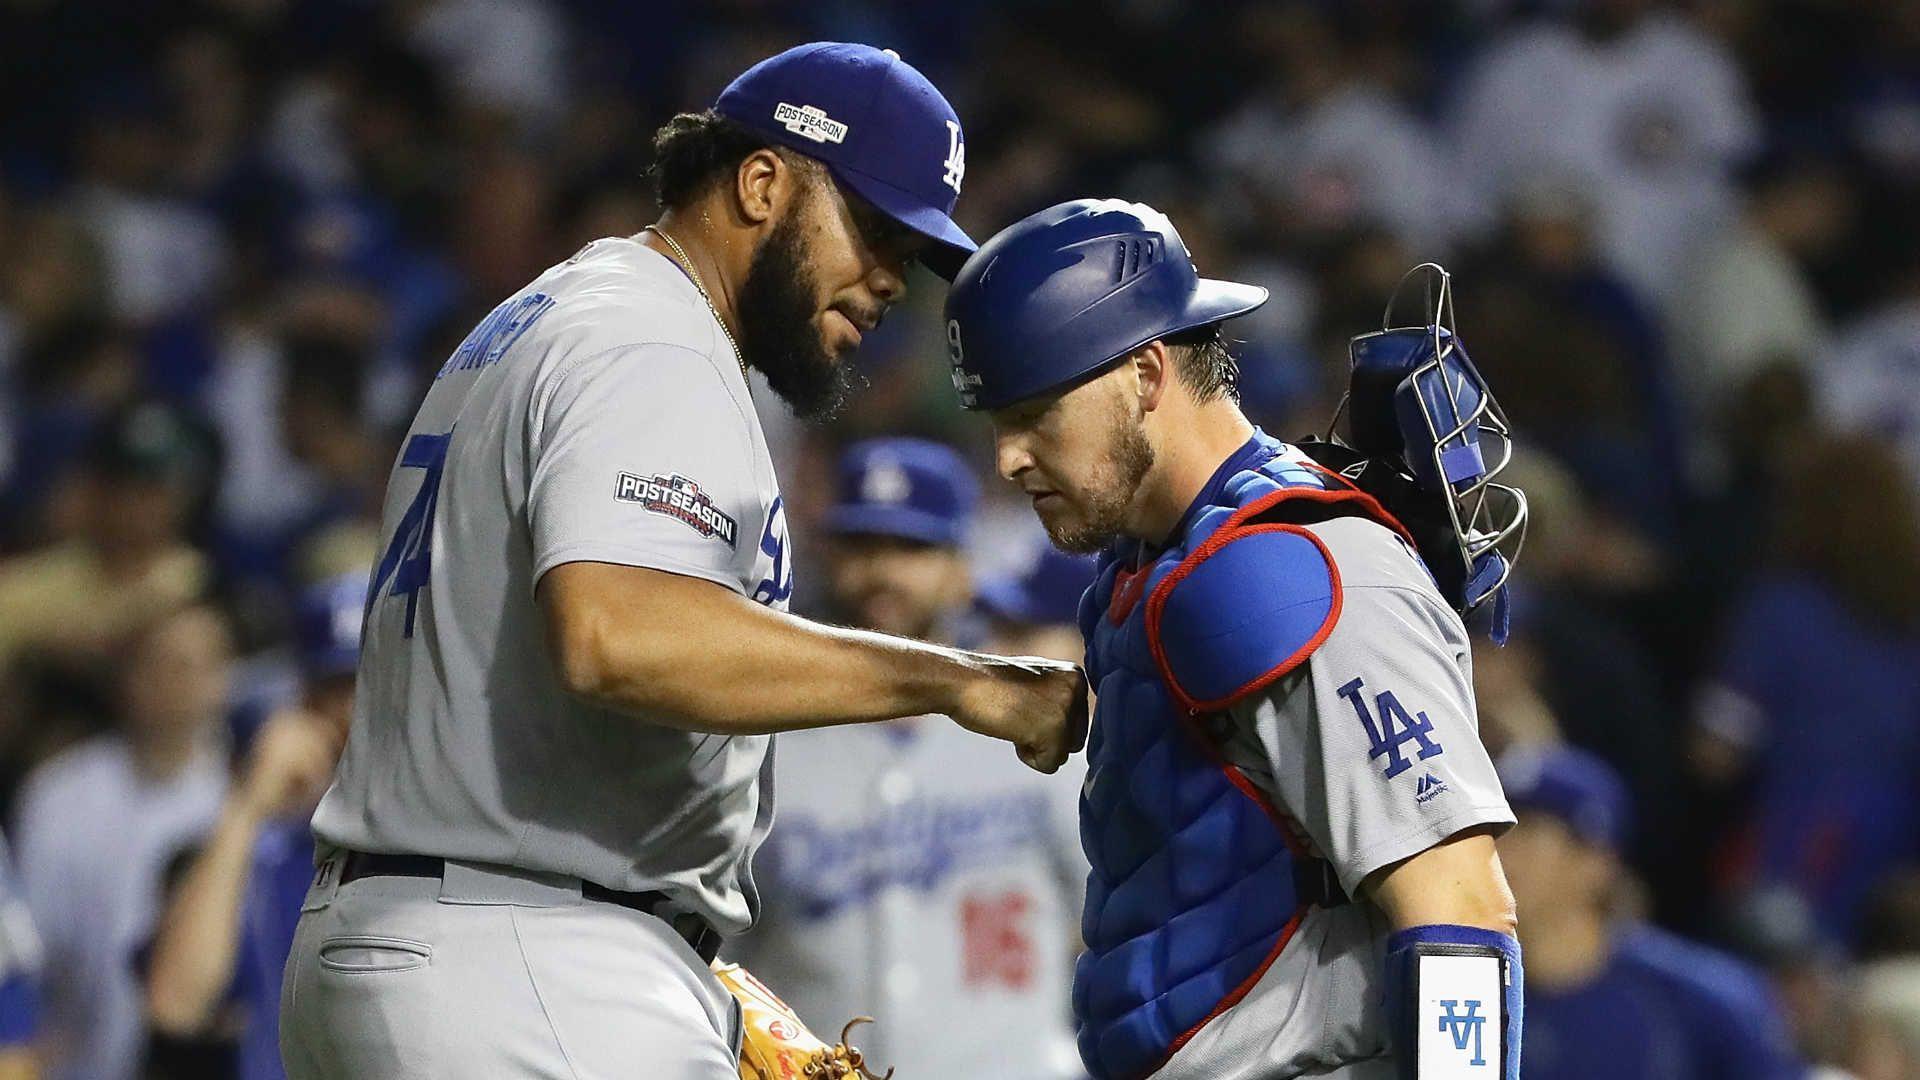 Cubs trying to steal signs, Dodgers' Yasmani Grandal says. MLB